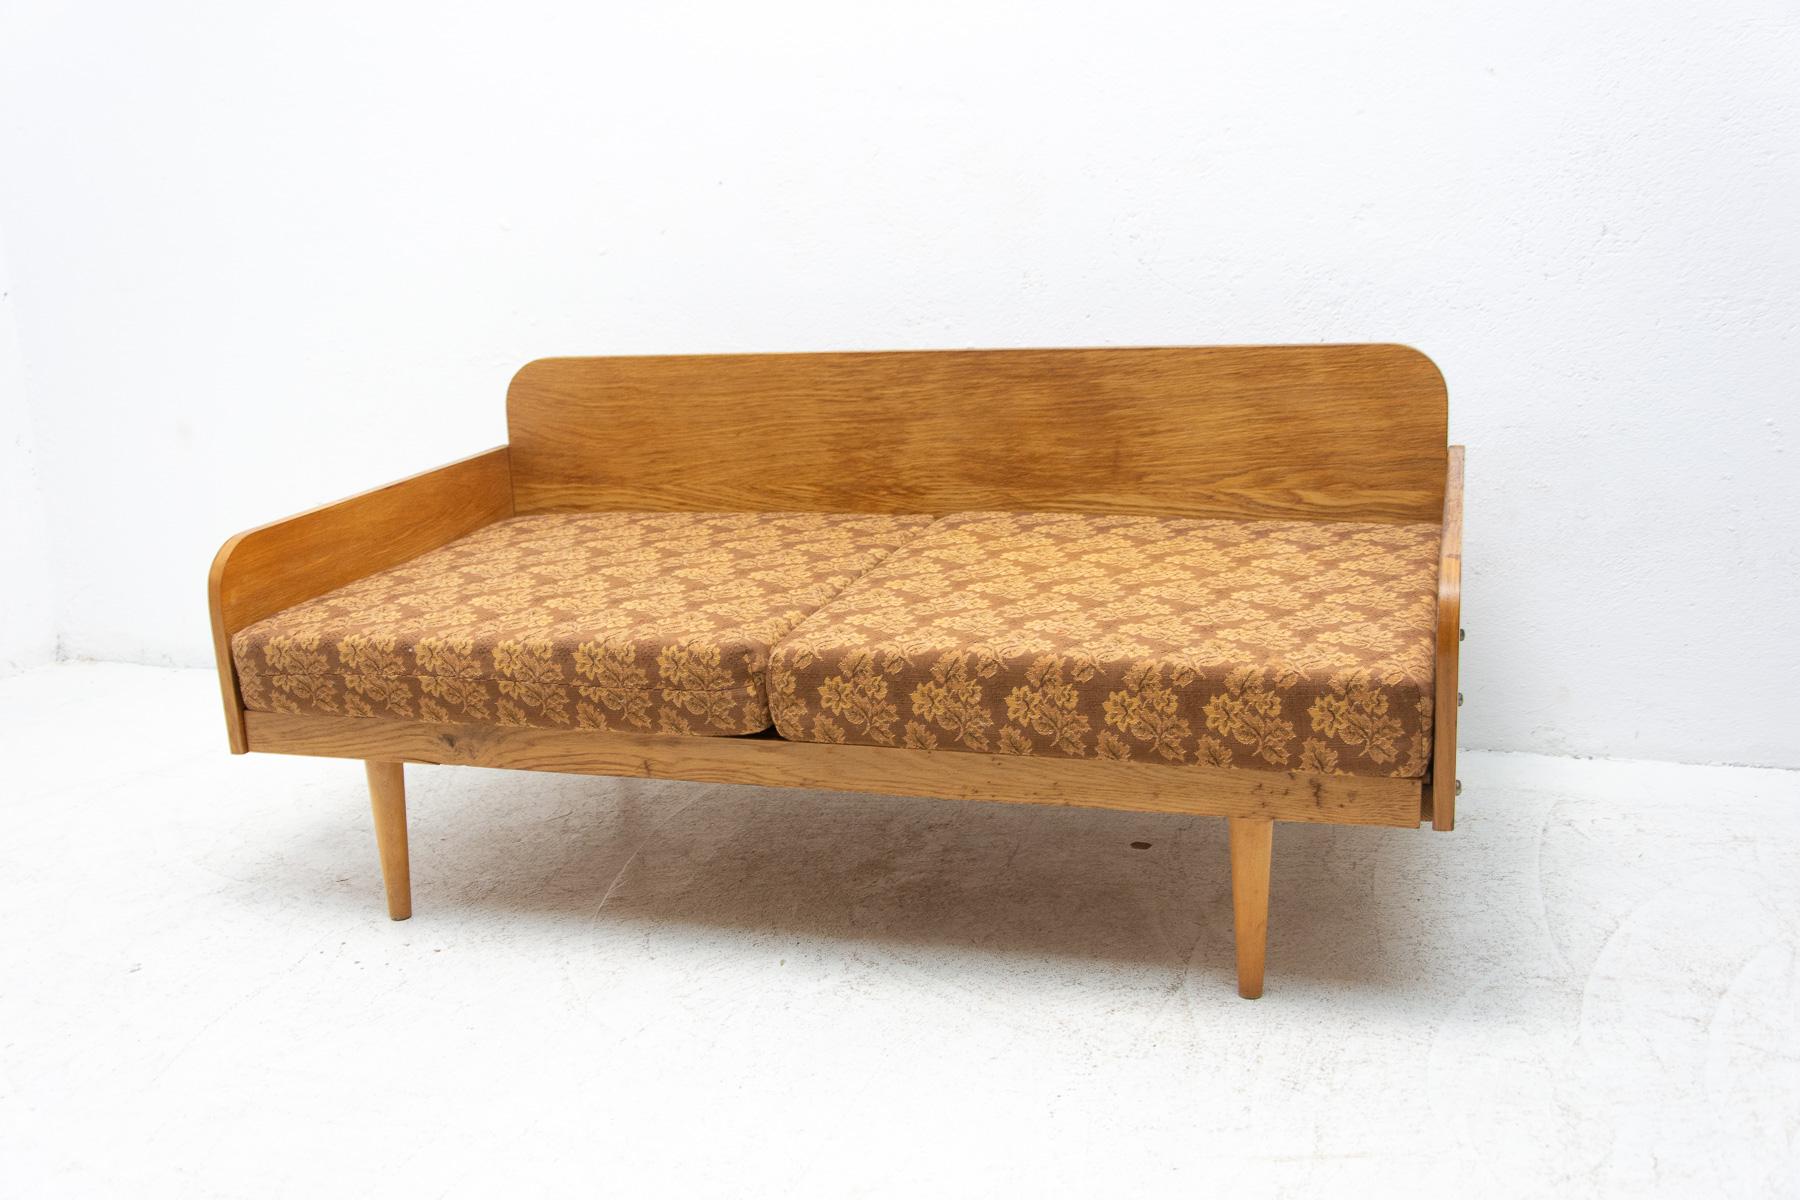 Mid-century small folding sofa from Interiér Praha. It was made in the former Czechoslovakia in the 1960´s. This sofa has wooden structure that is veneered in beech wood. The mattresses are rather soft but comfortable. Overall in good Vintage